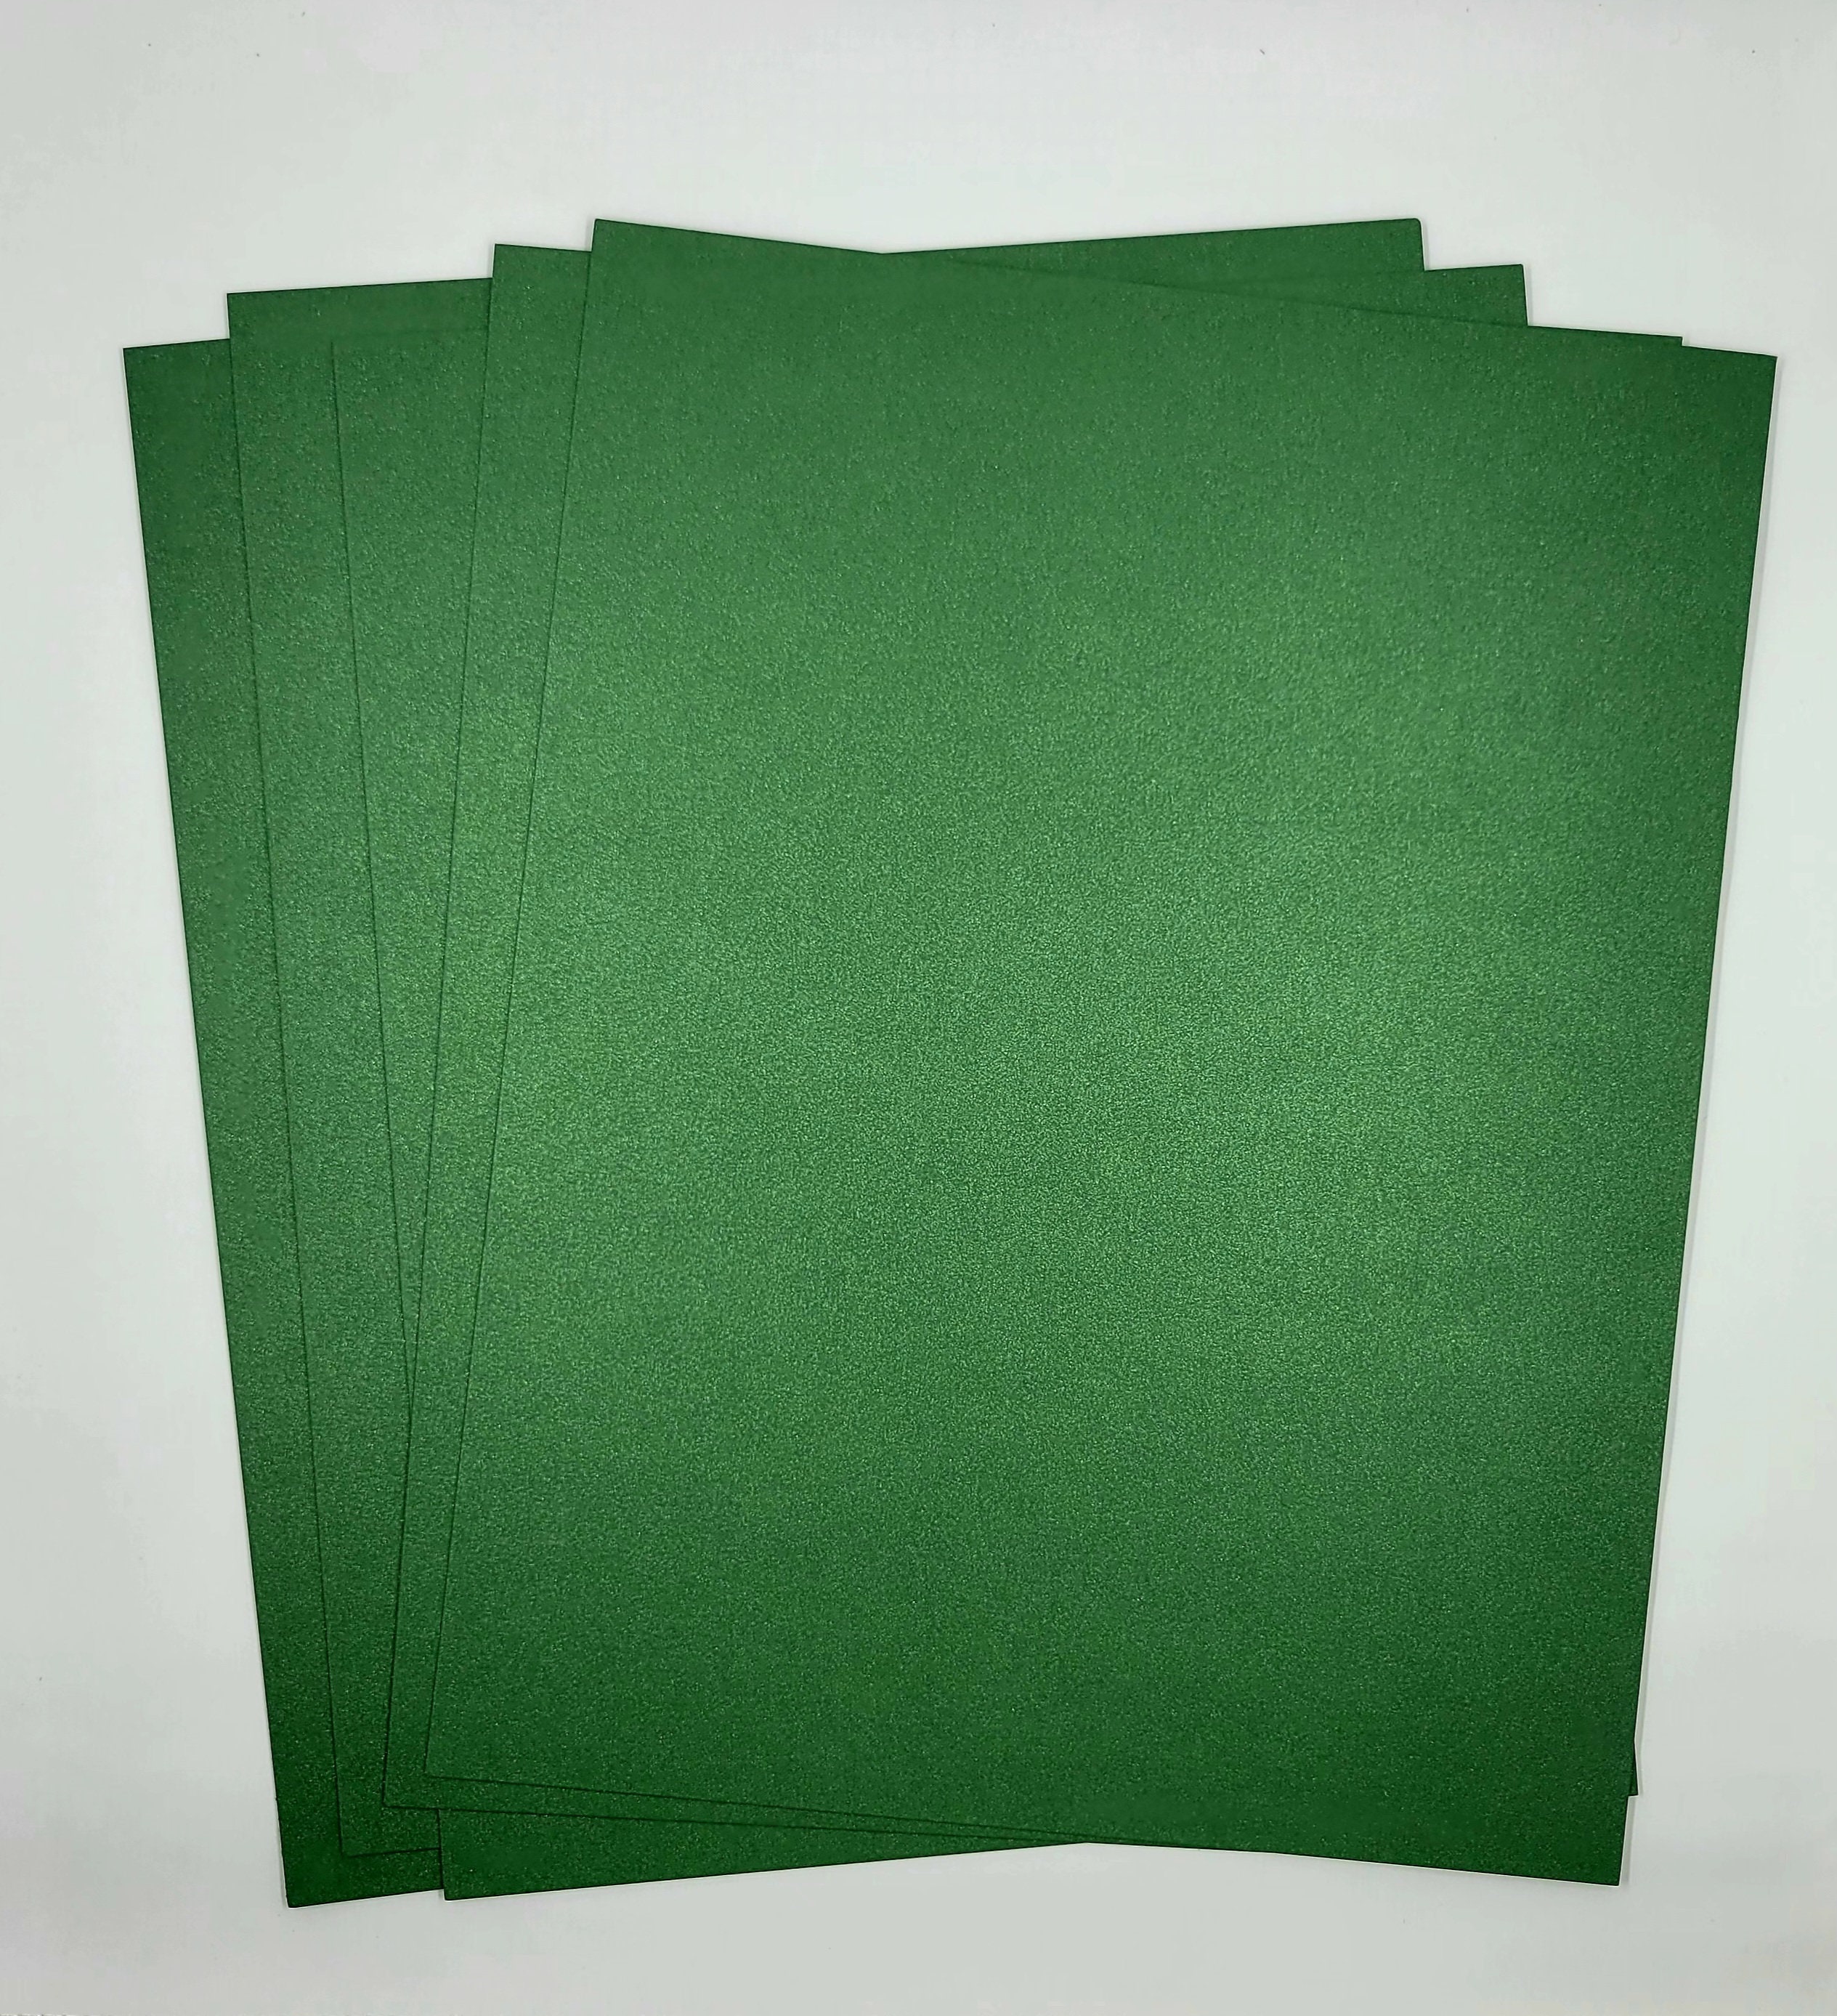 Premium Cardstock Paper, 80lb Cardstock Sheets, 8.5 X 11 Inch,  Scrapbooking, Card Making 10 Sheets, Over 35 Colors 